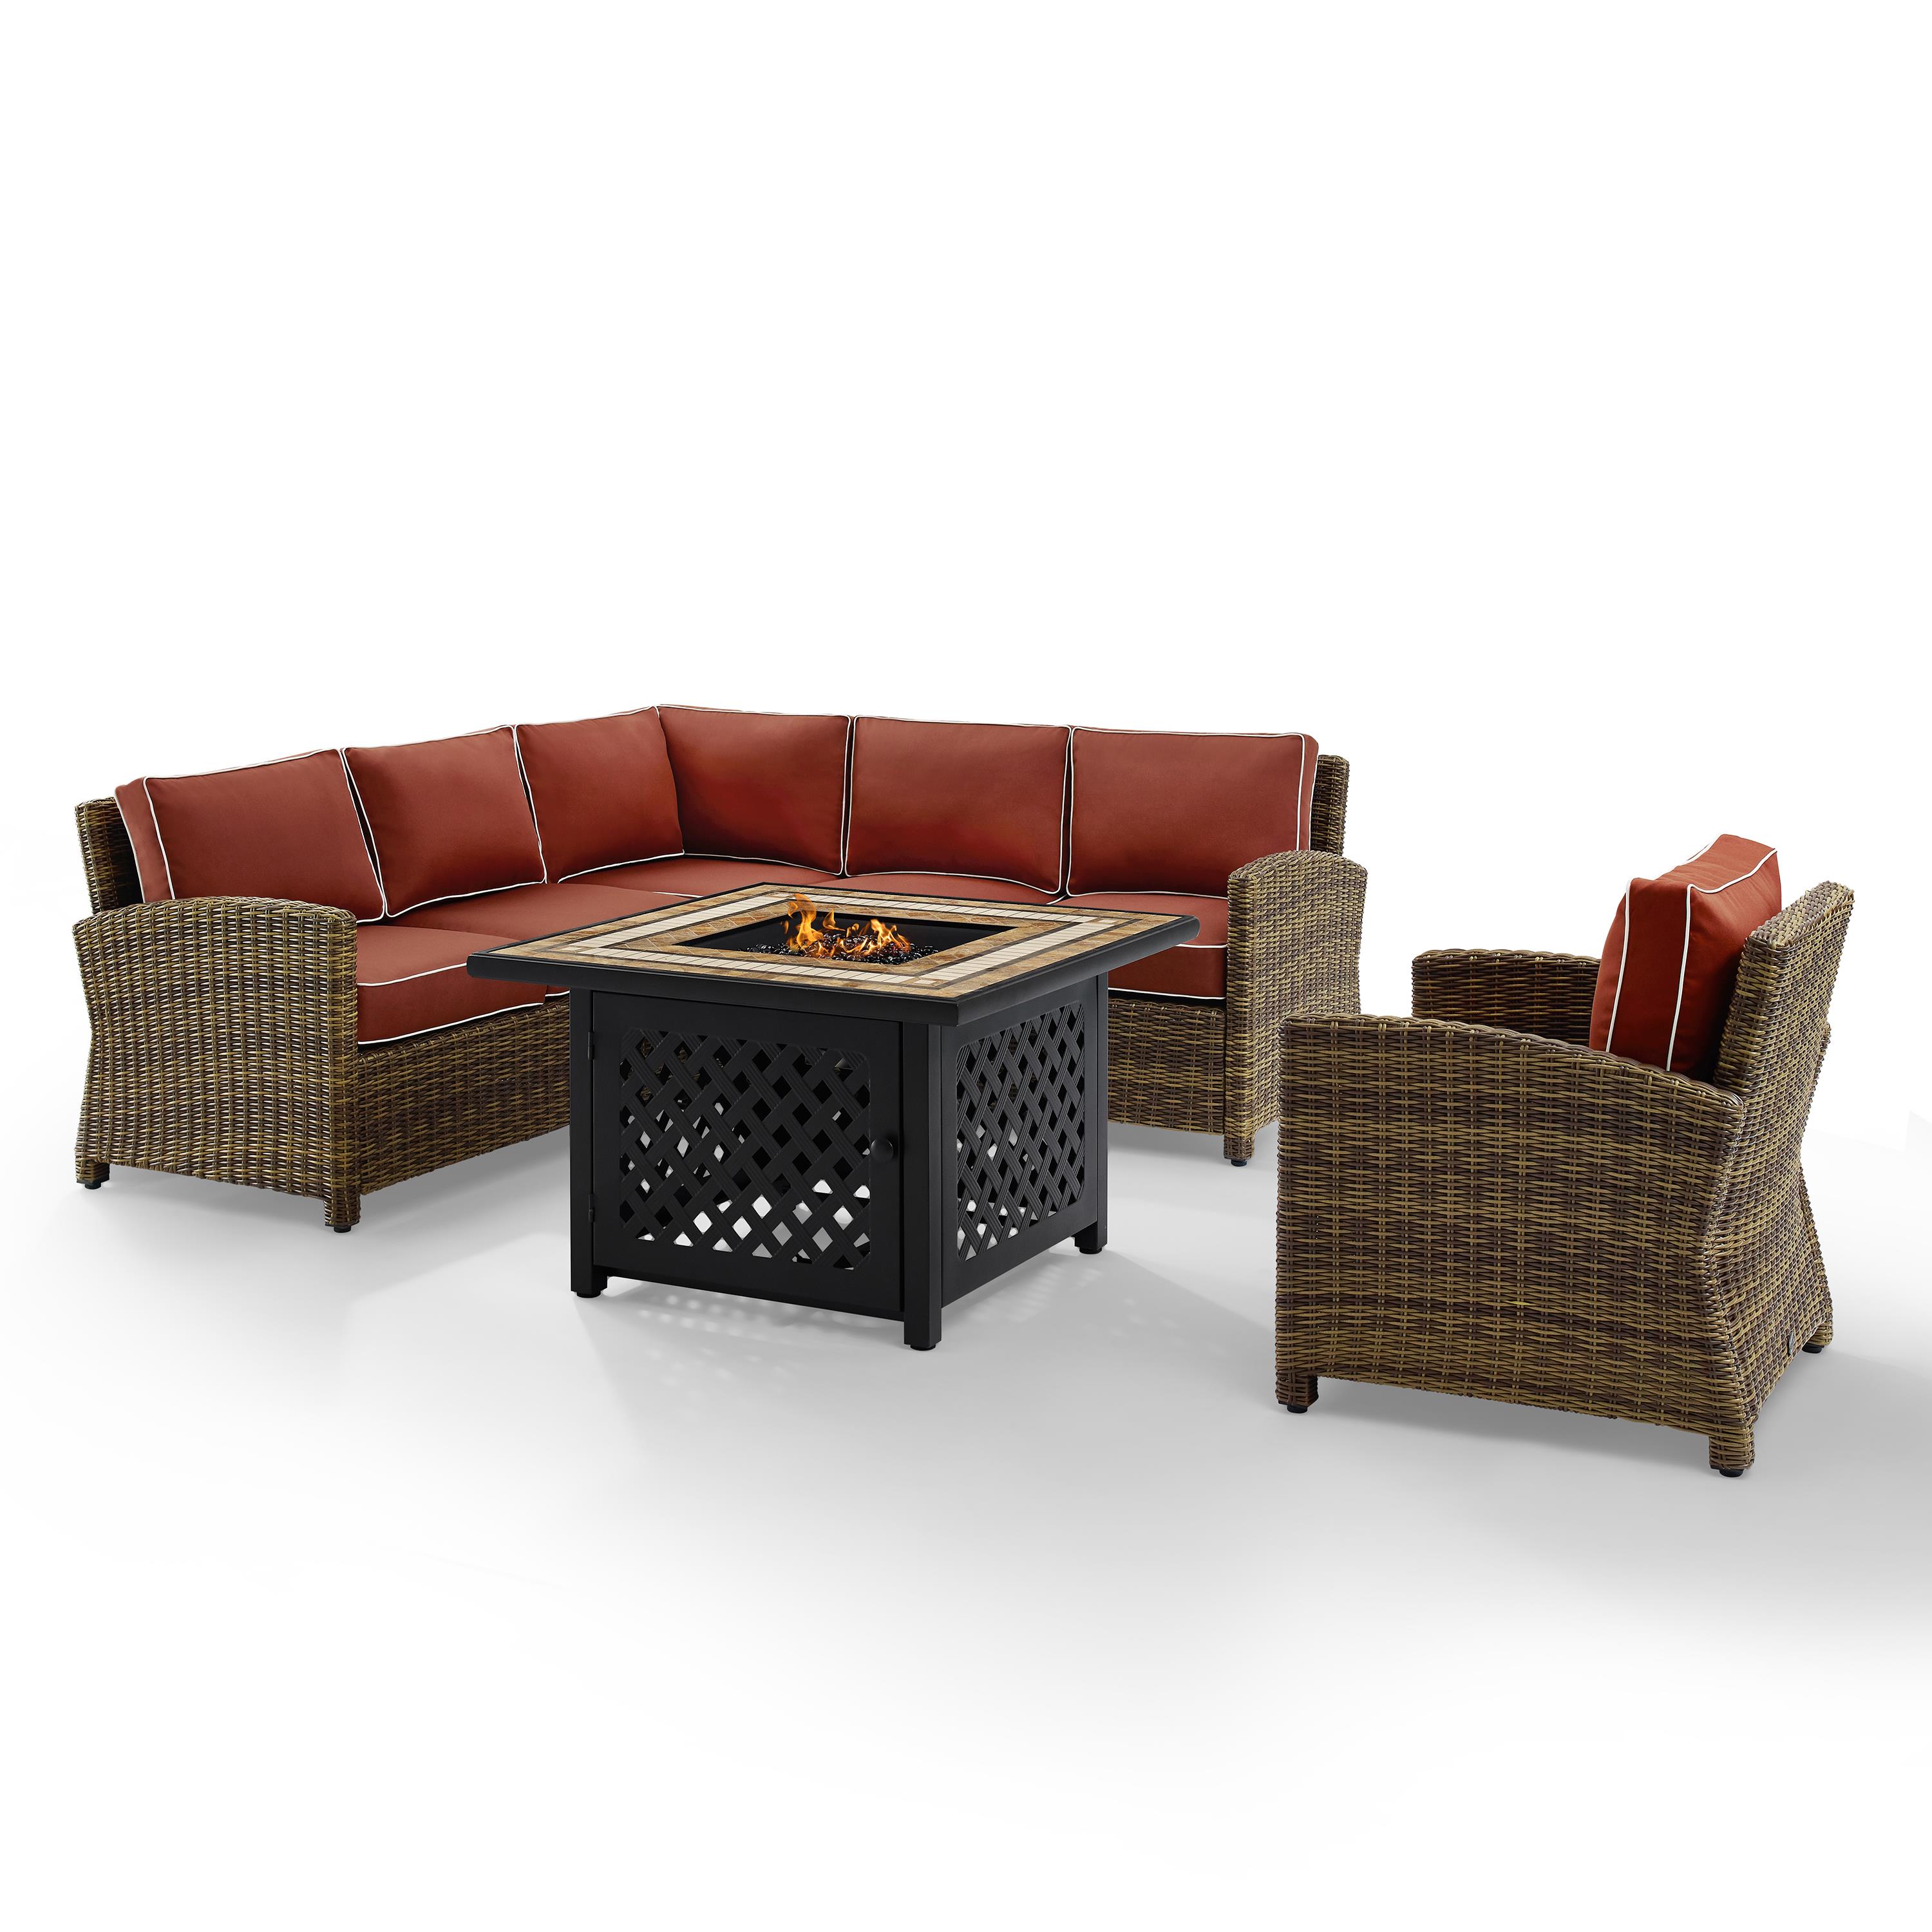 Bradenton 5Pc Outdoor Wicker Sectional Set W/Fire Table Weathered Brown/Sangria - Right Corner Loveseat, Left Corner Loveseat, Corner Chair, Armchair, & Tucson Fire Table - image 2 of 9